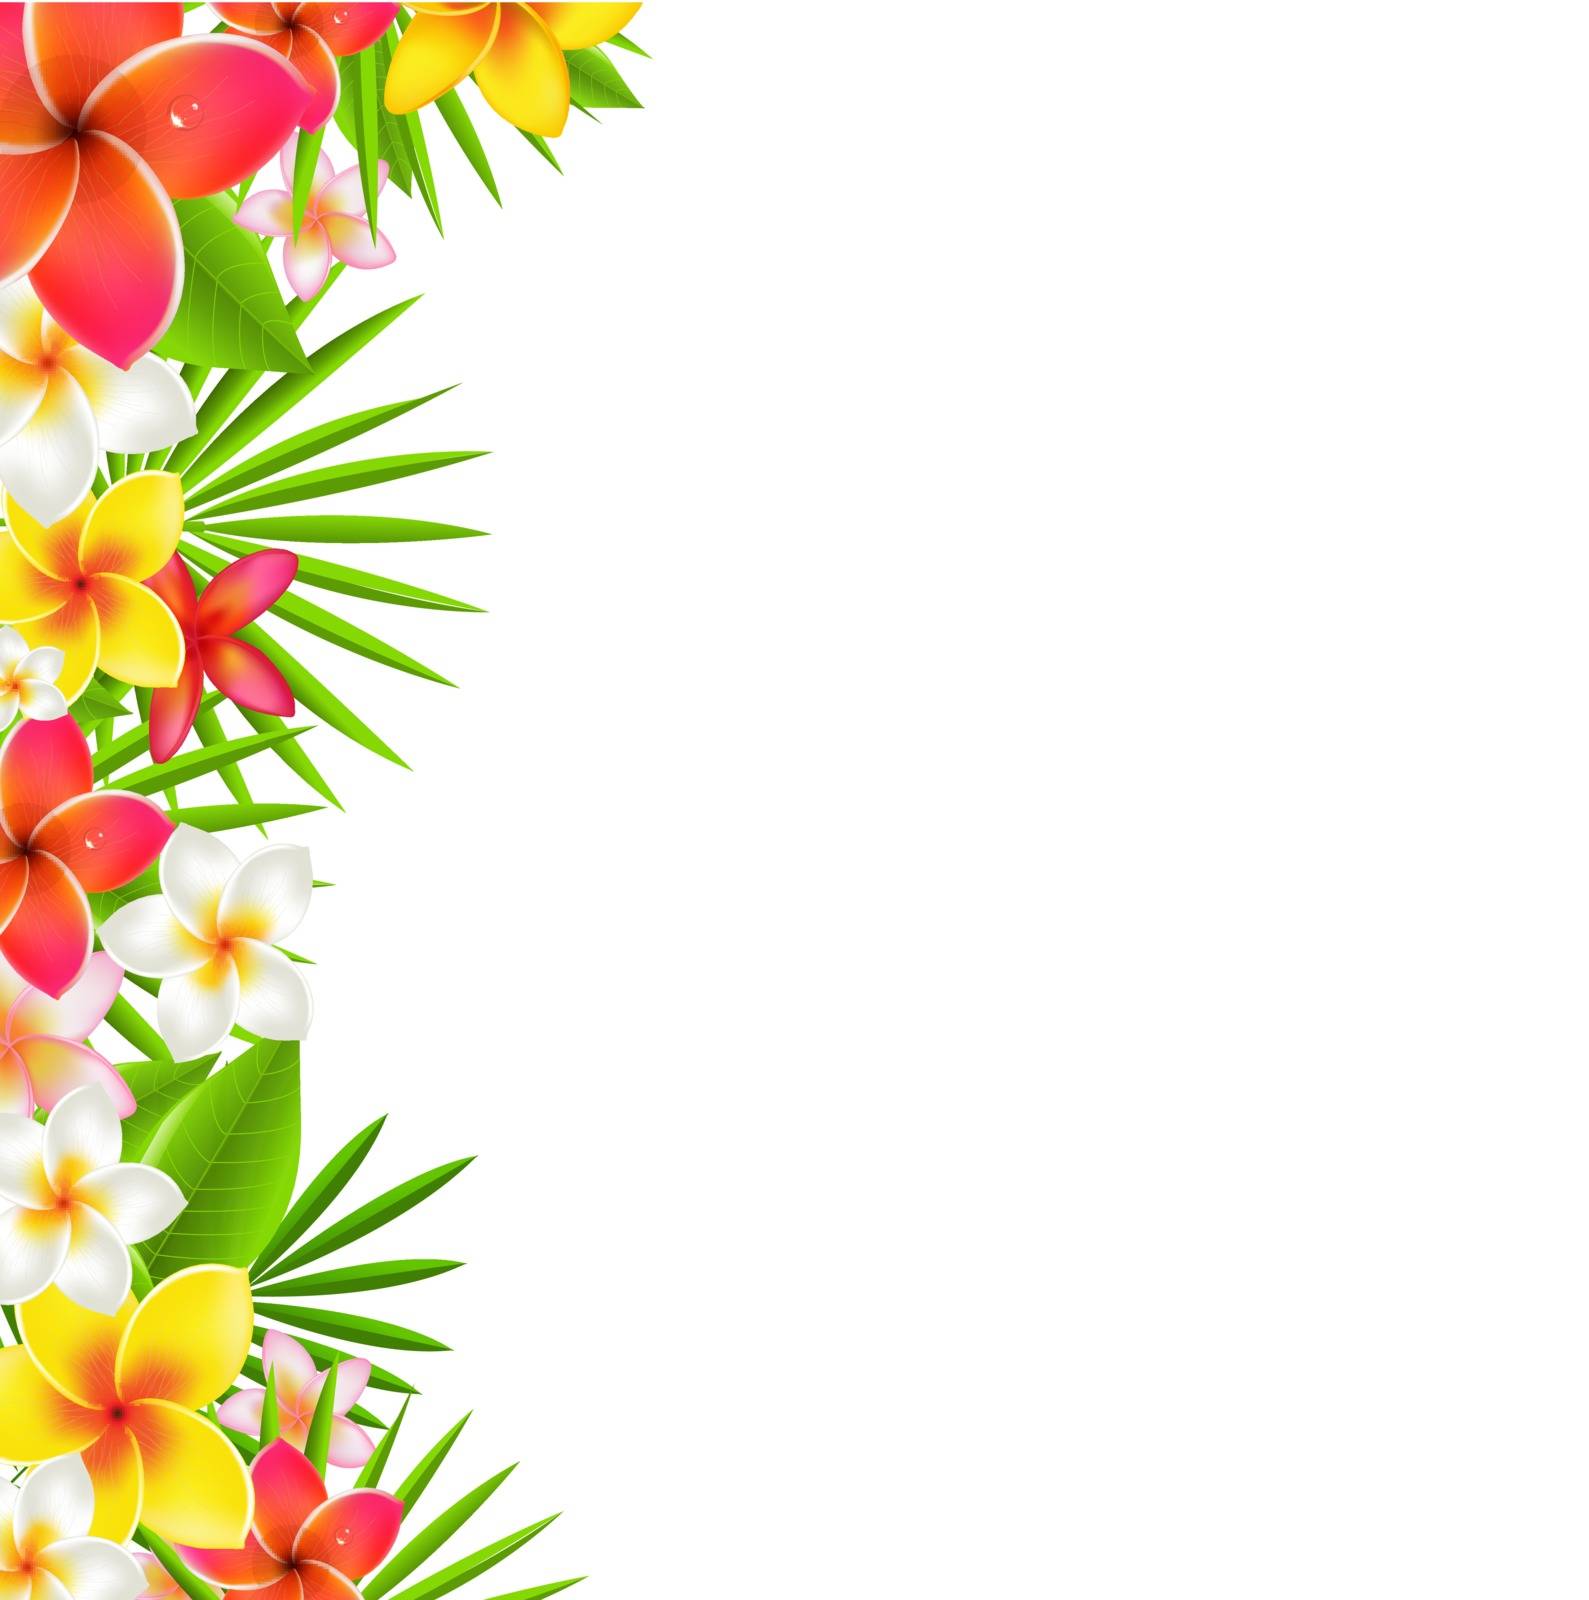 Flowers Border, With Gradient Mesh, Vector Illustration